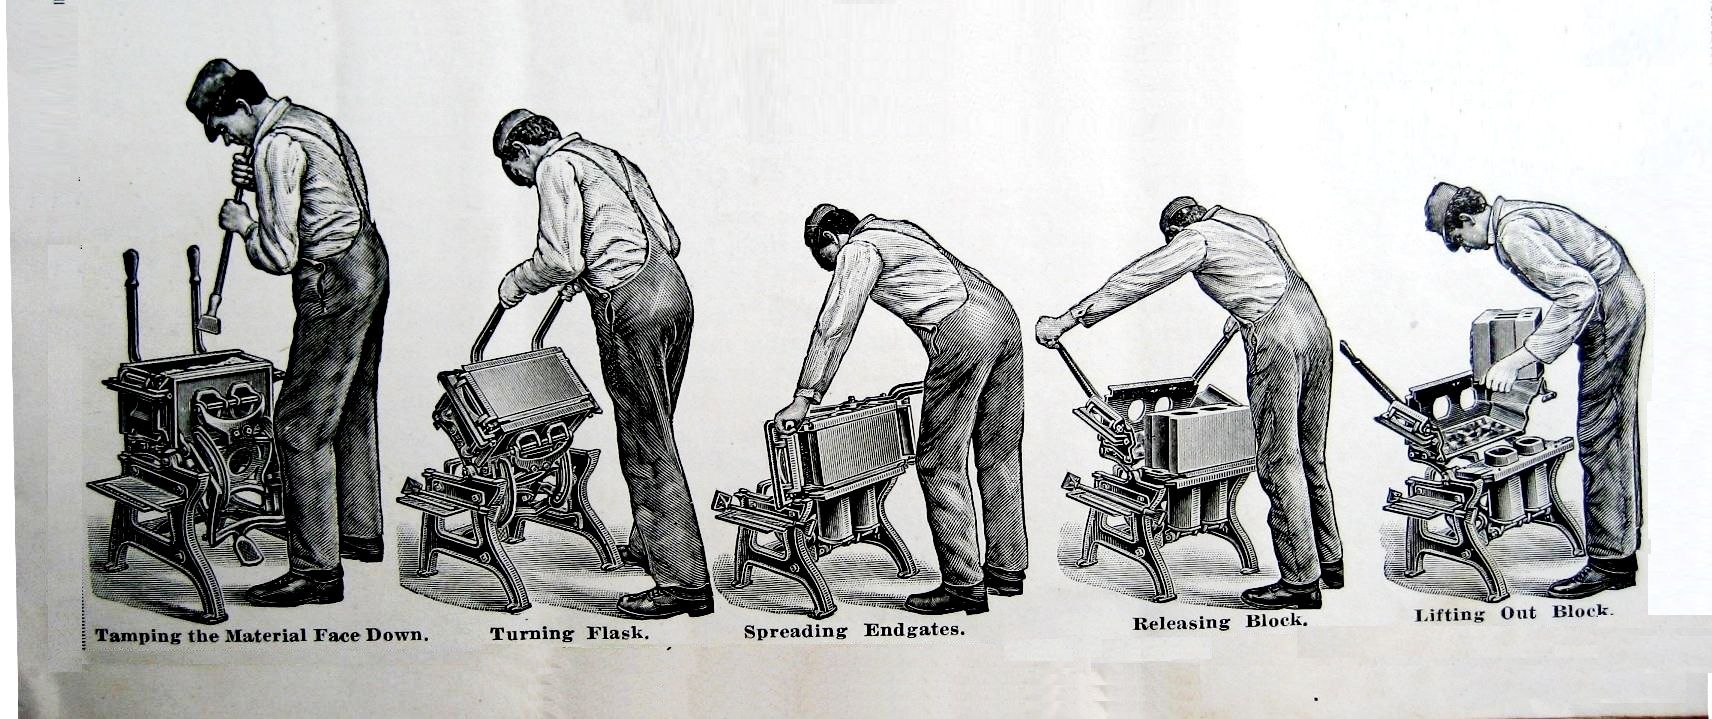 In what looks like a backwards evolution graphic, a man demonstrates how to use the easy-to-use Wizard block-making machine.